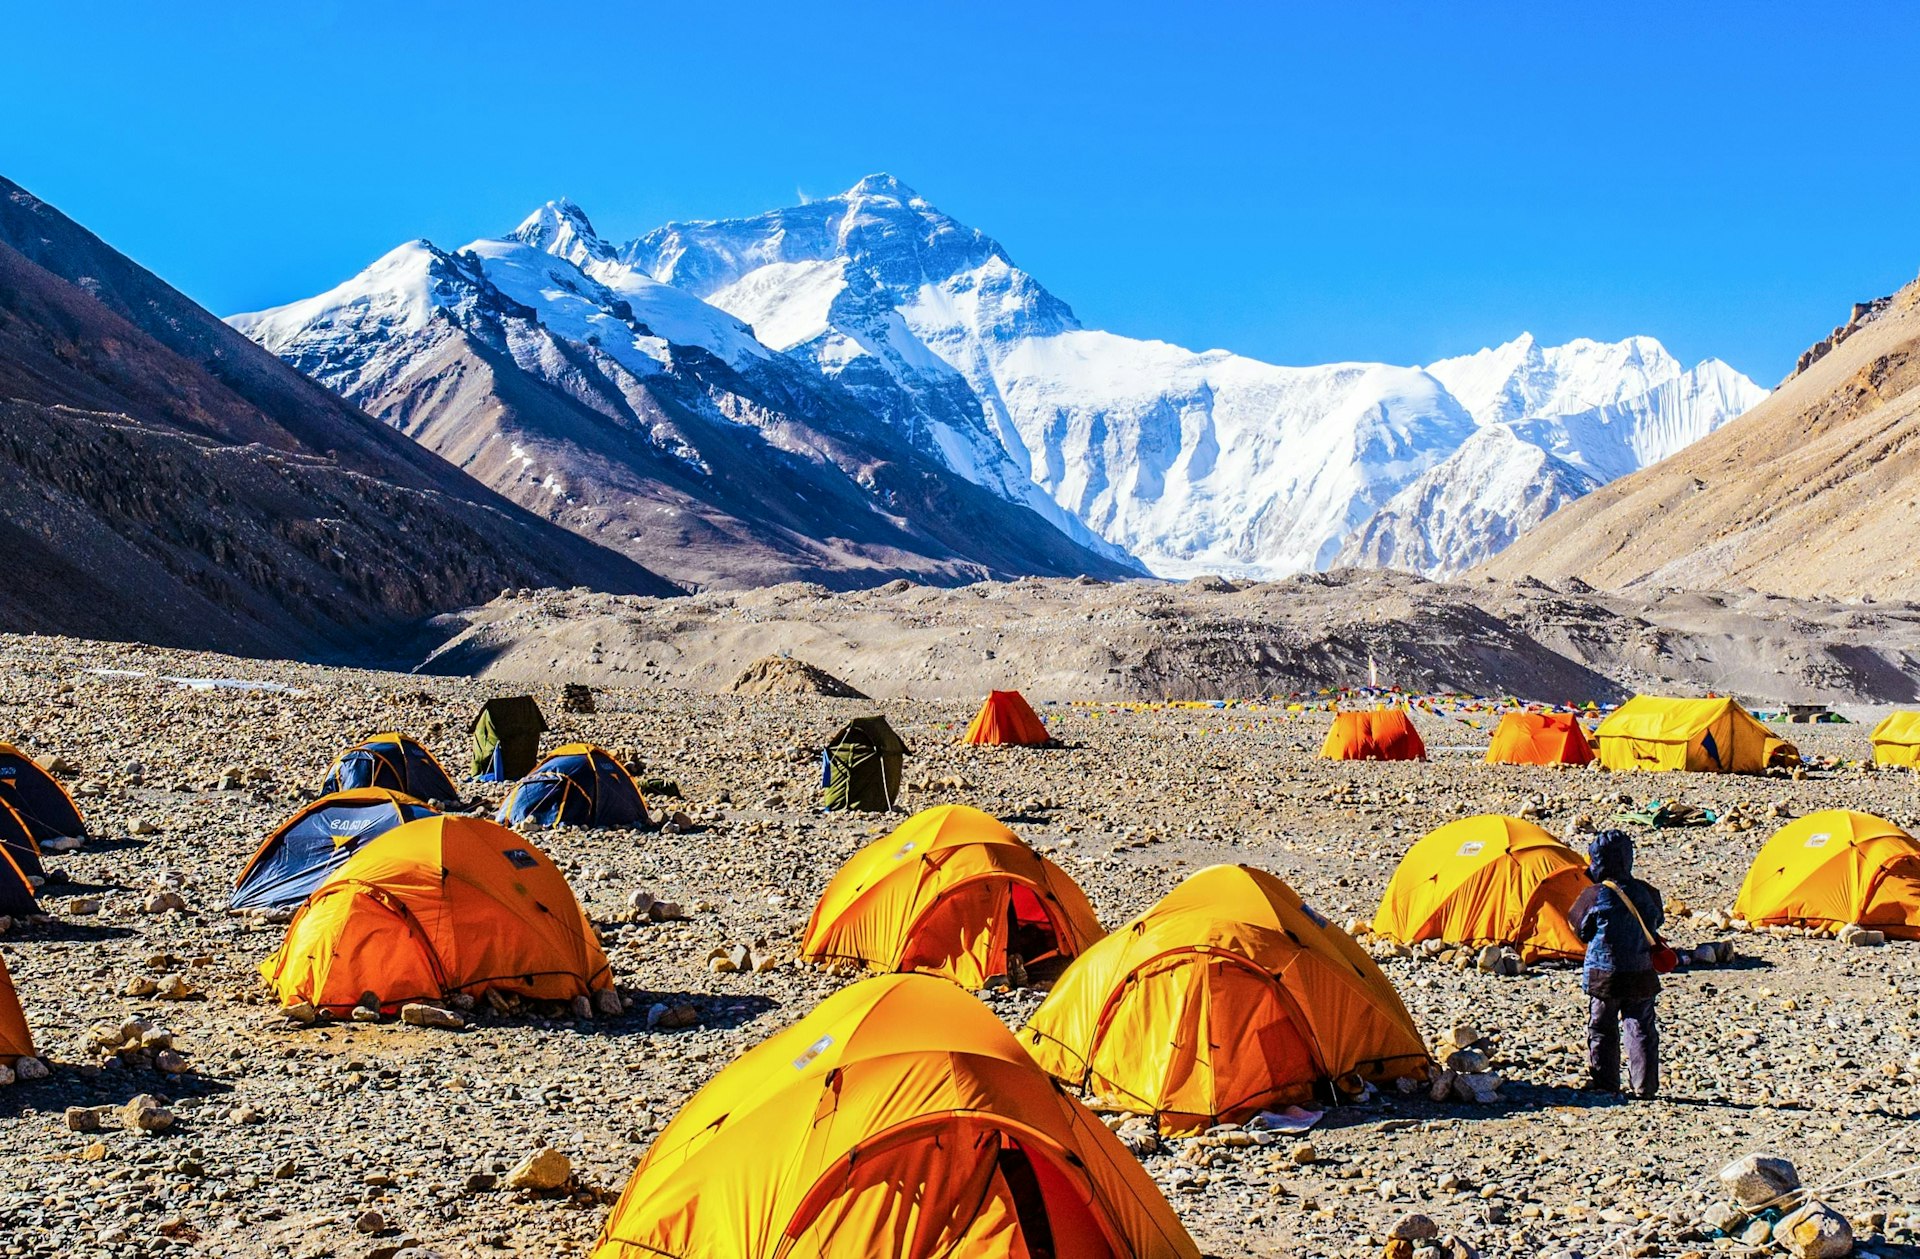 A series of yellow tents pitched on a rocky terrain at the foot of a snow-capped mountain 